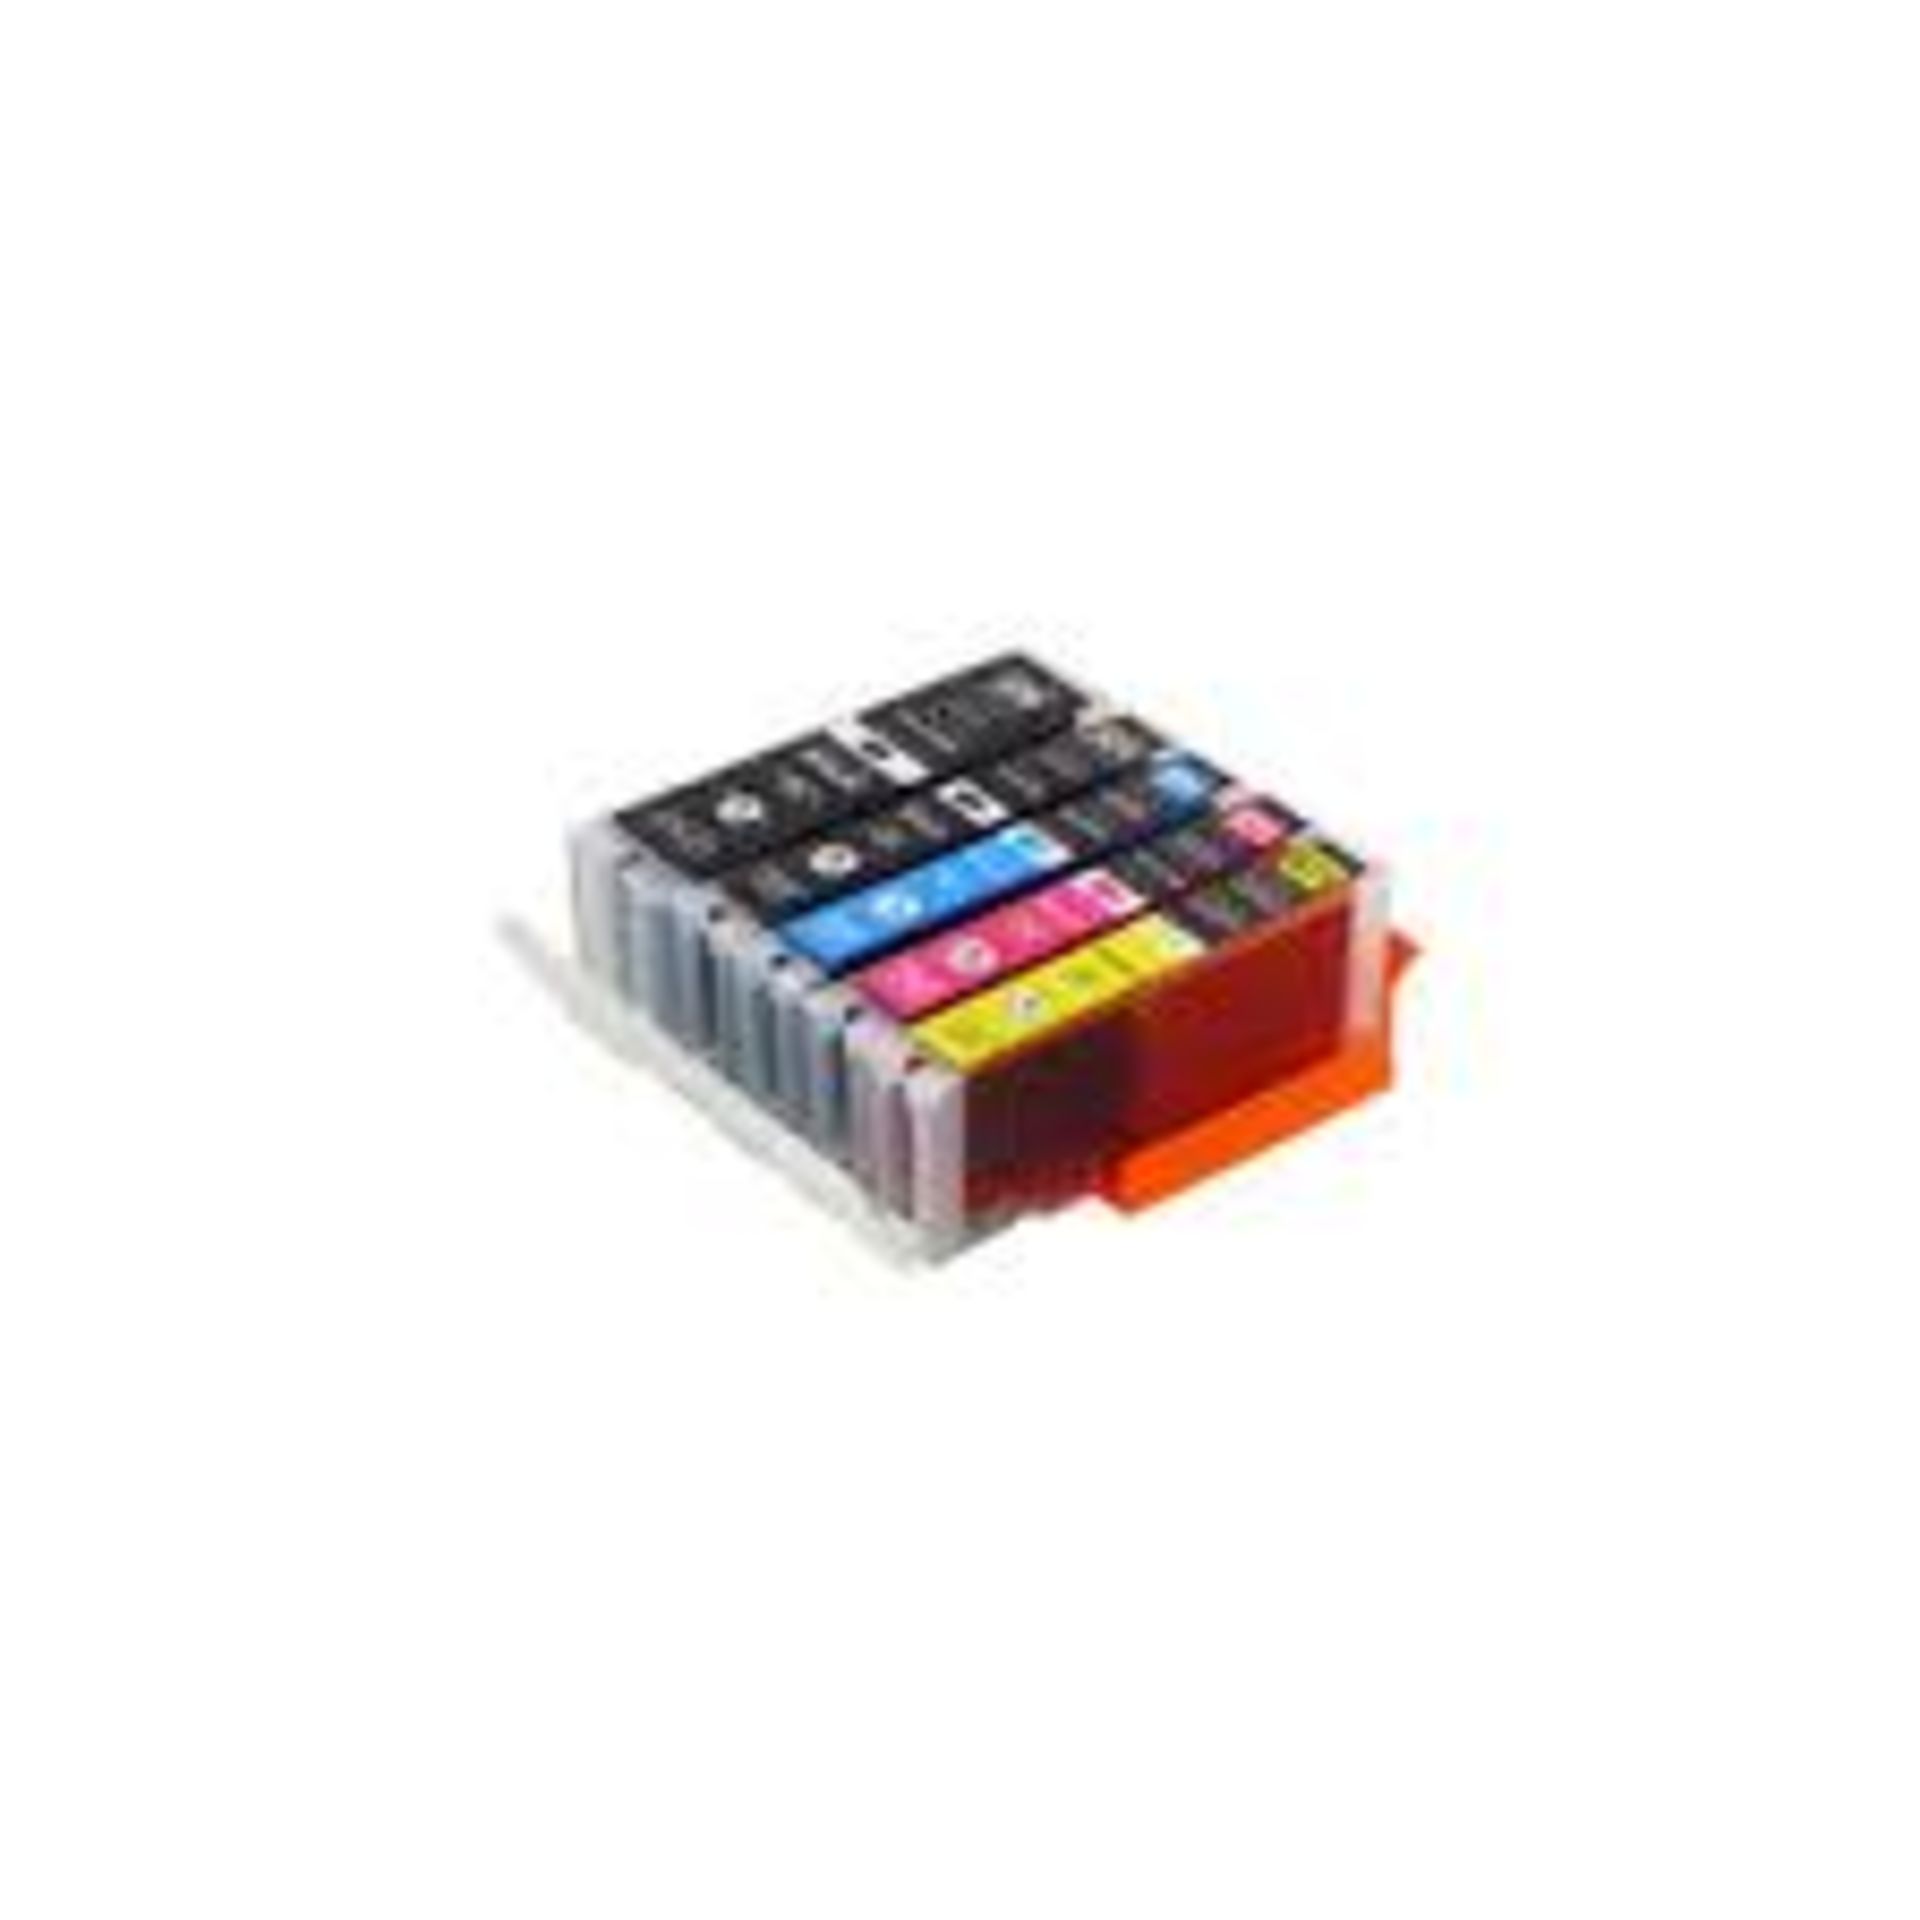 MAJOR LIQUIDATION OF CIRCA 15000 PRINTER CARTRIDGES/TONERS COMPATIBLE WITH BROTHER, EPSON, HP, CANO - Image 3 of 5